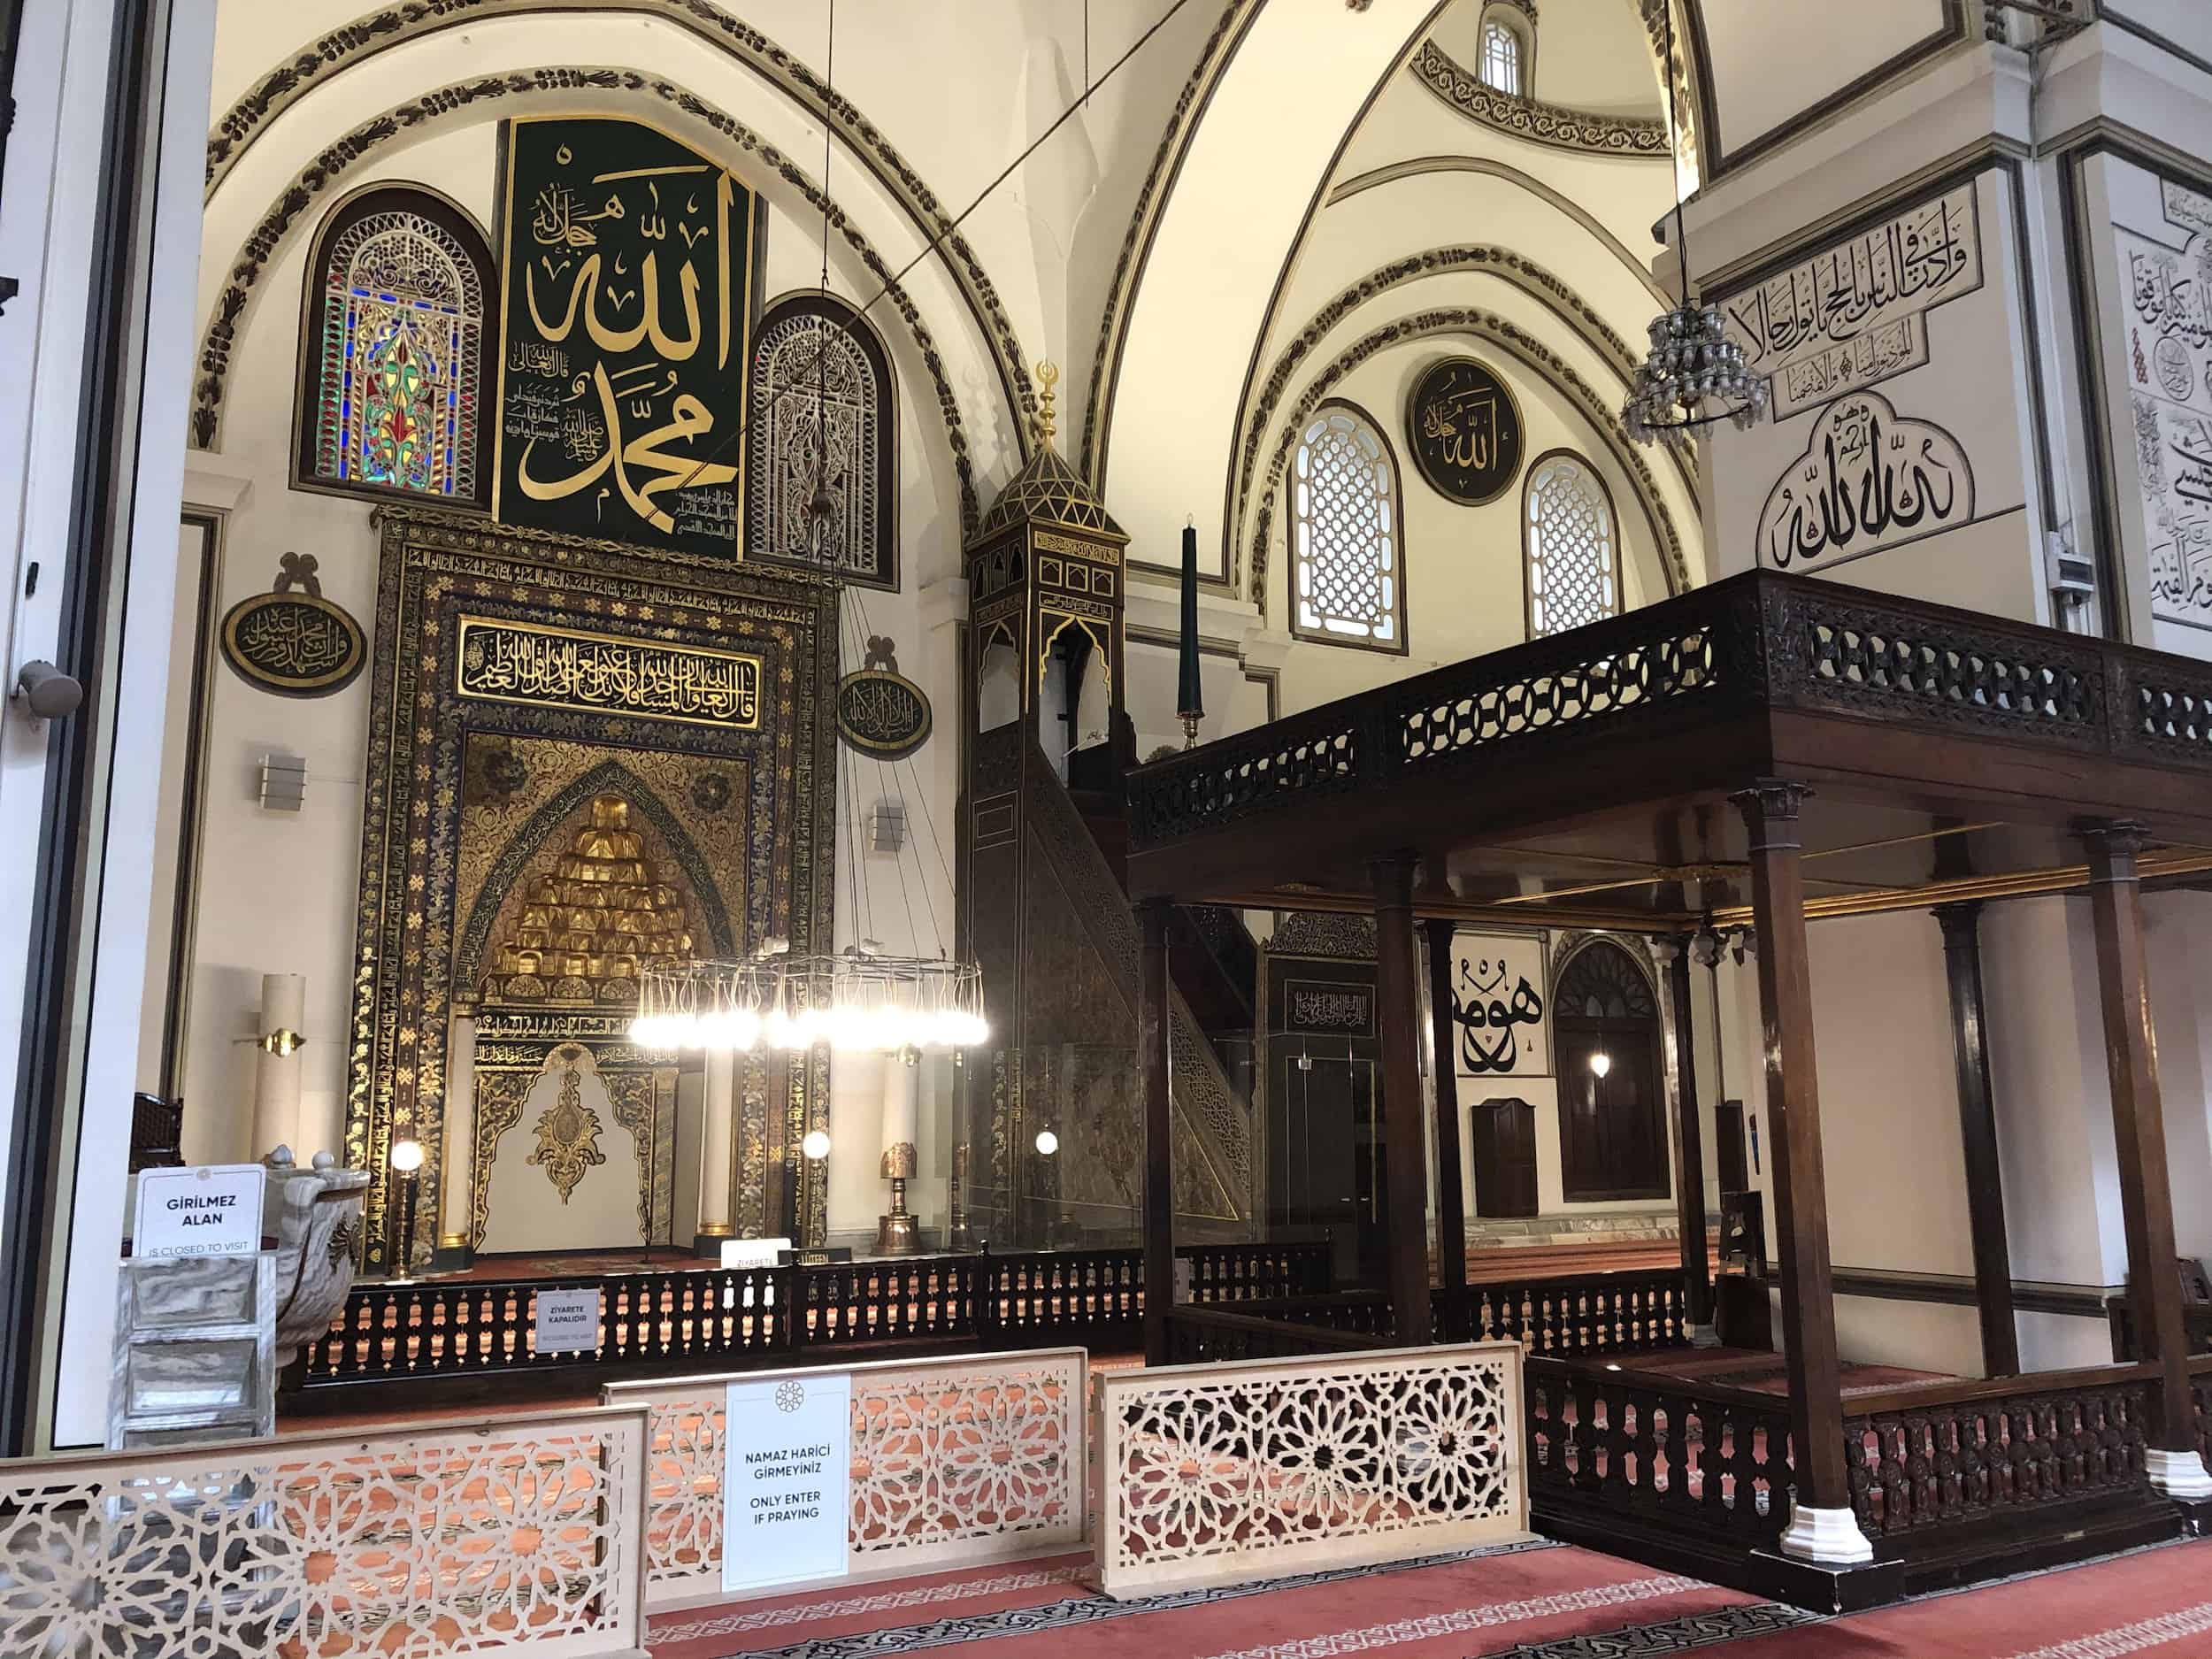 Mihrab and muezzin's loge of the Grand Mosque in Bursa, Turkey